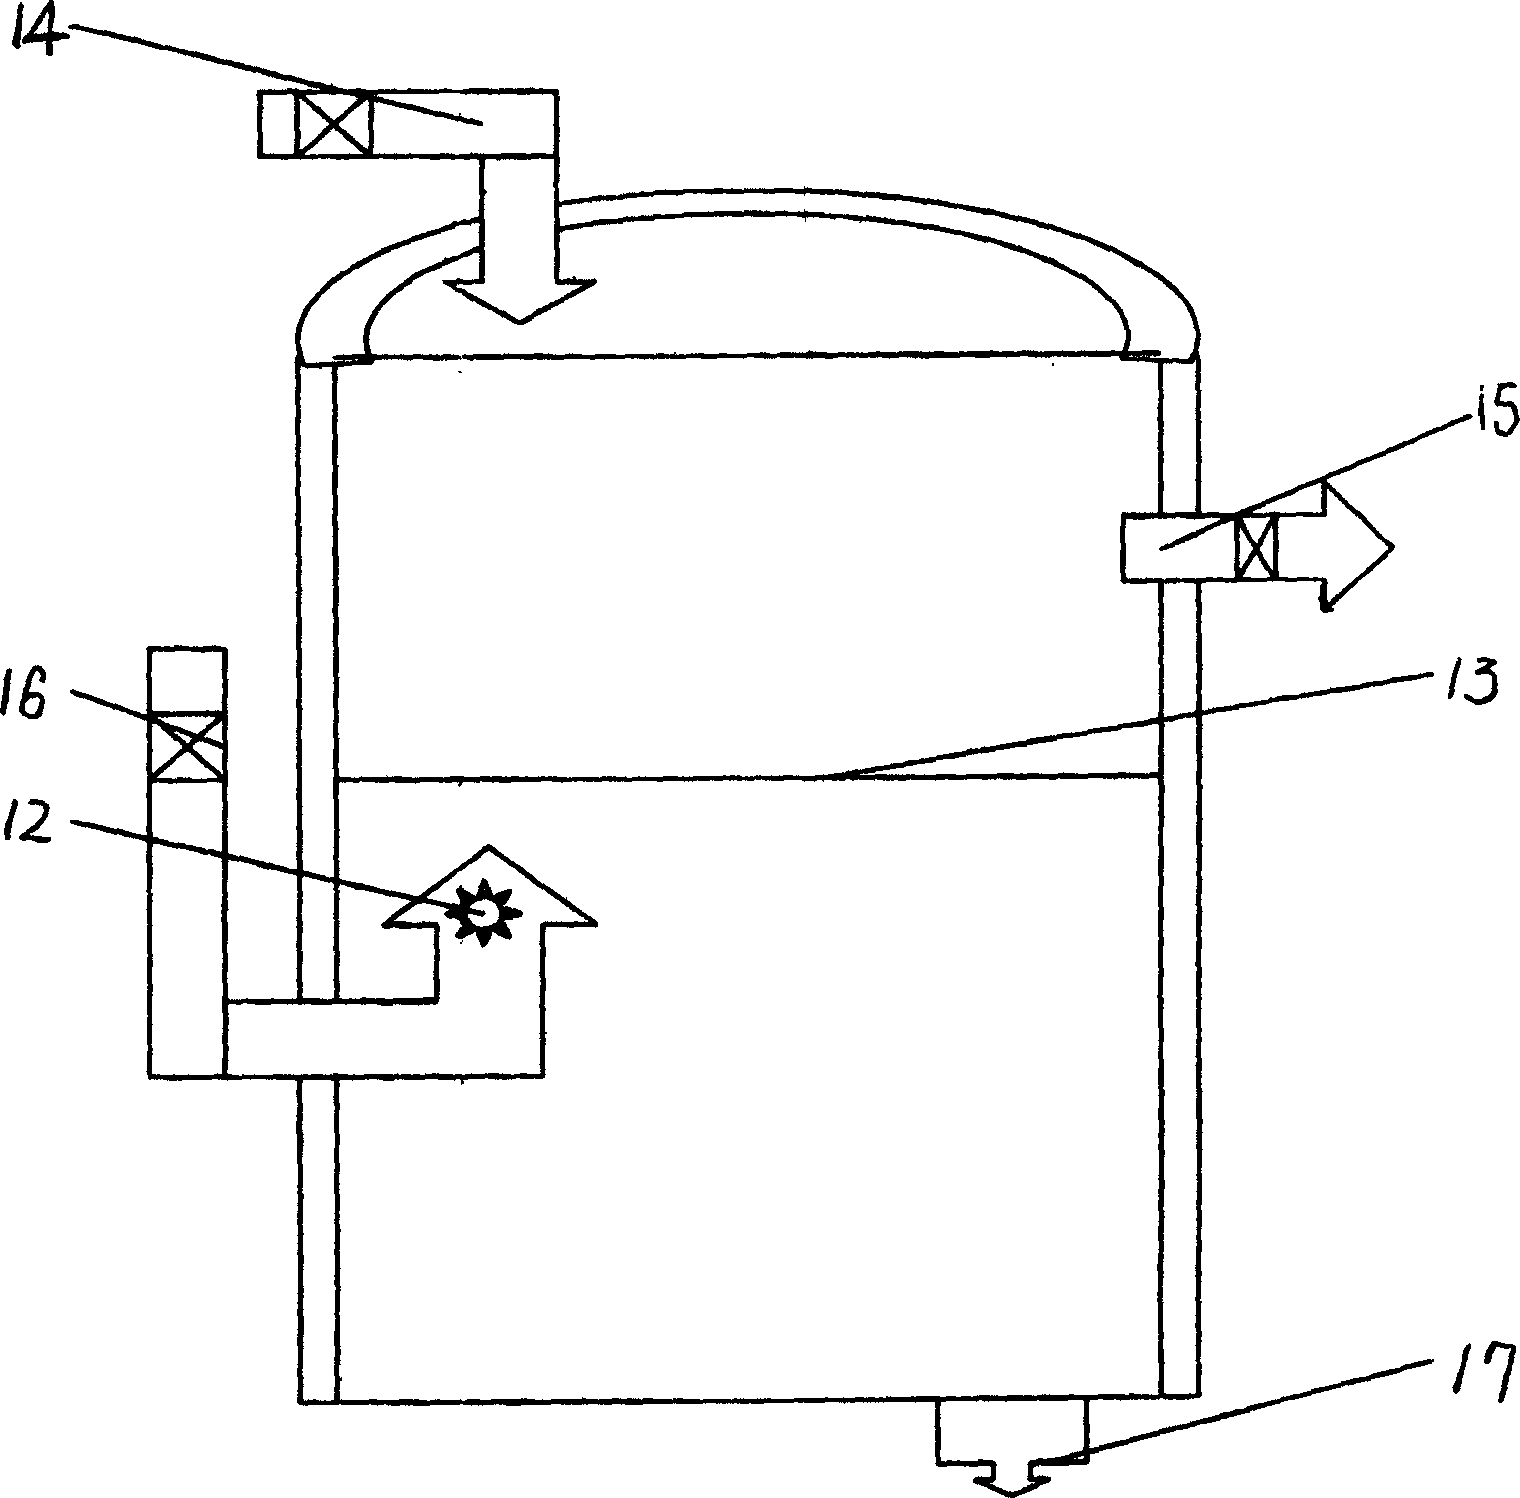 Method for producing liquefied gas from plant stalks